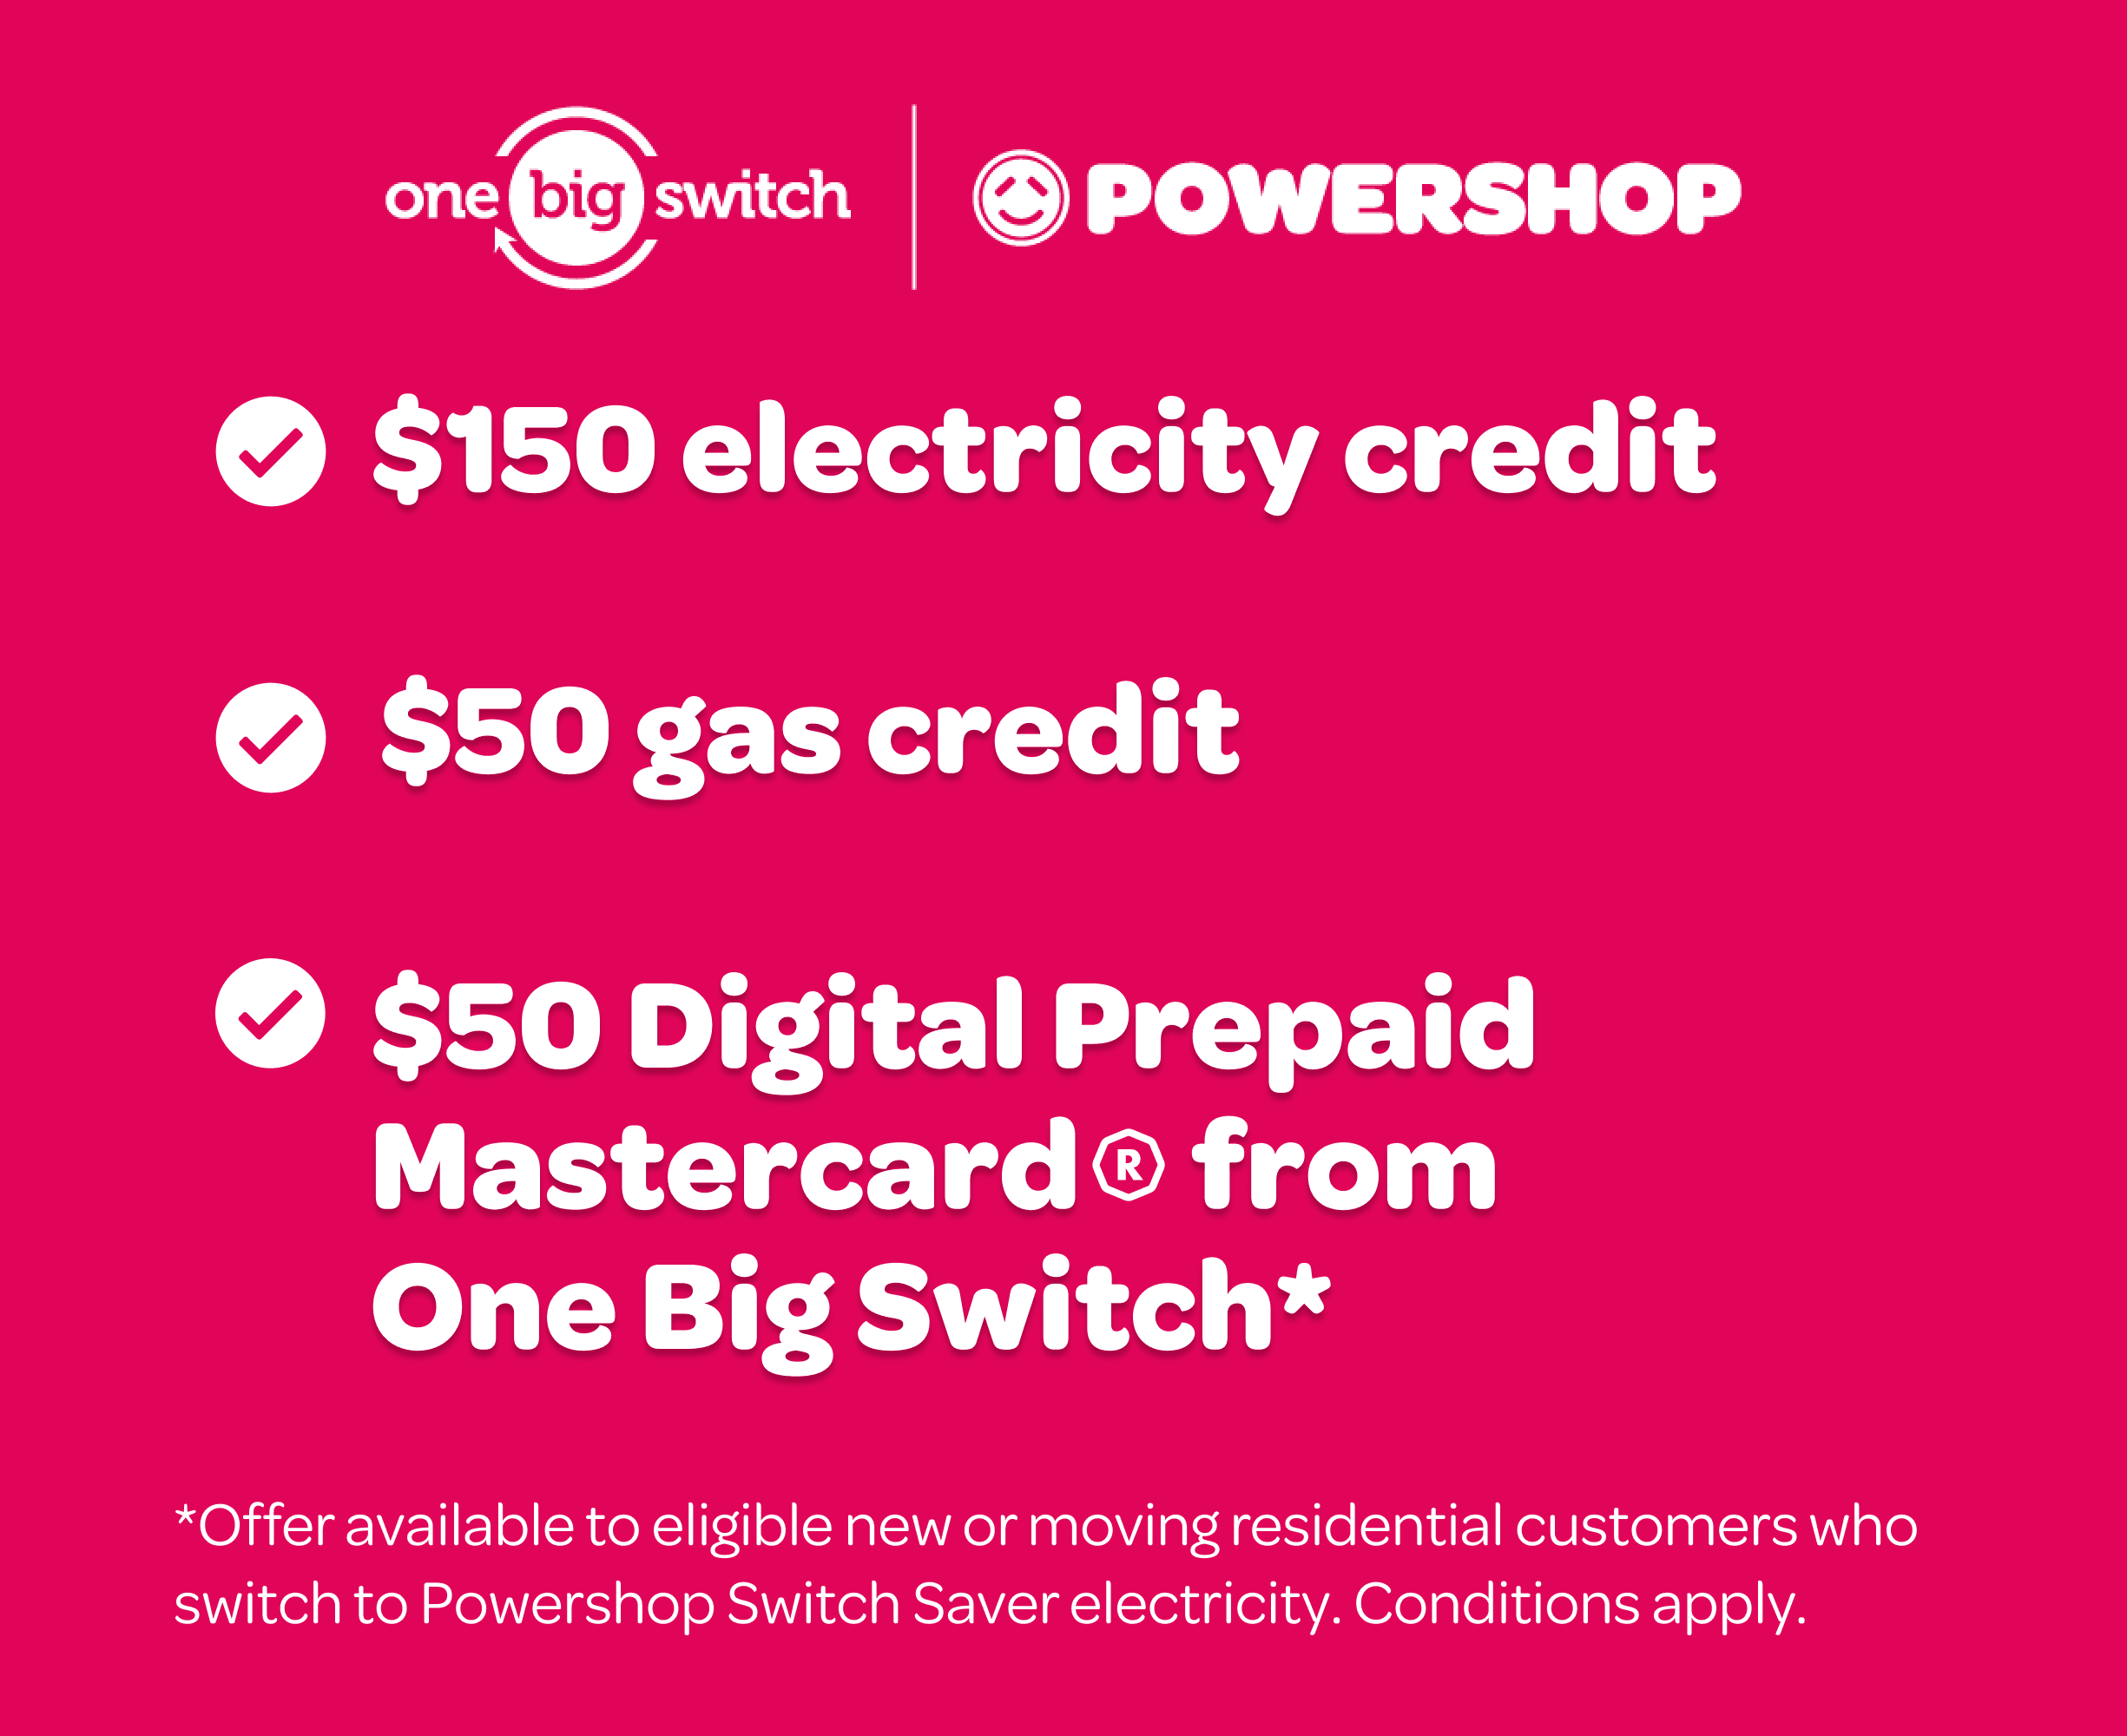 Powershop offer with One Big Switch